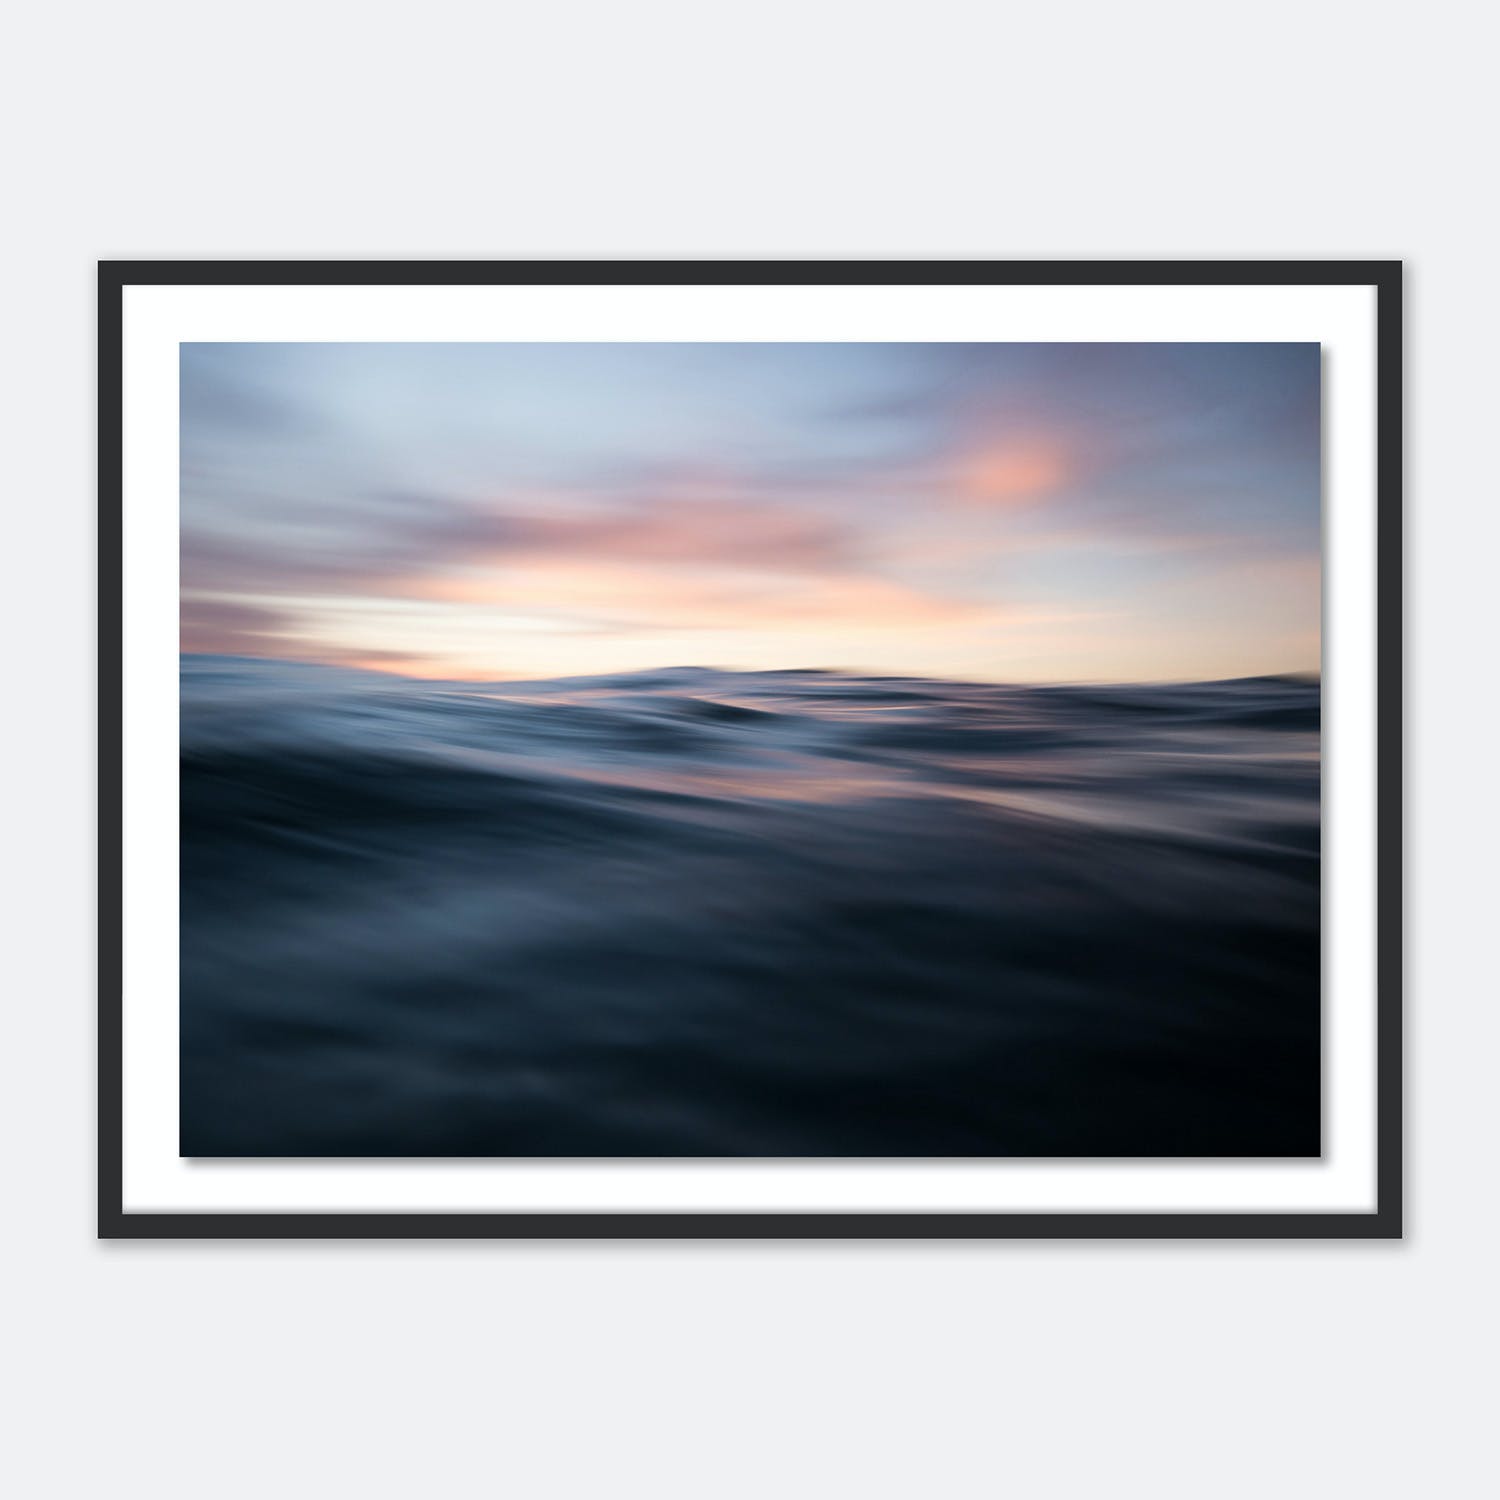 Serene seascape captures the dynamic movement of water at dusk.